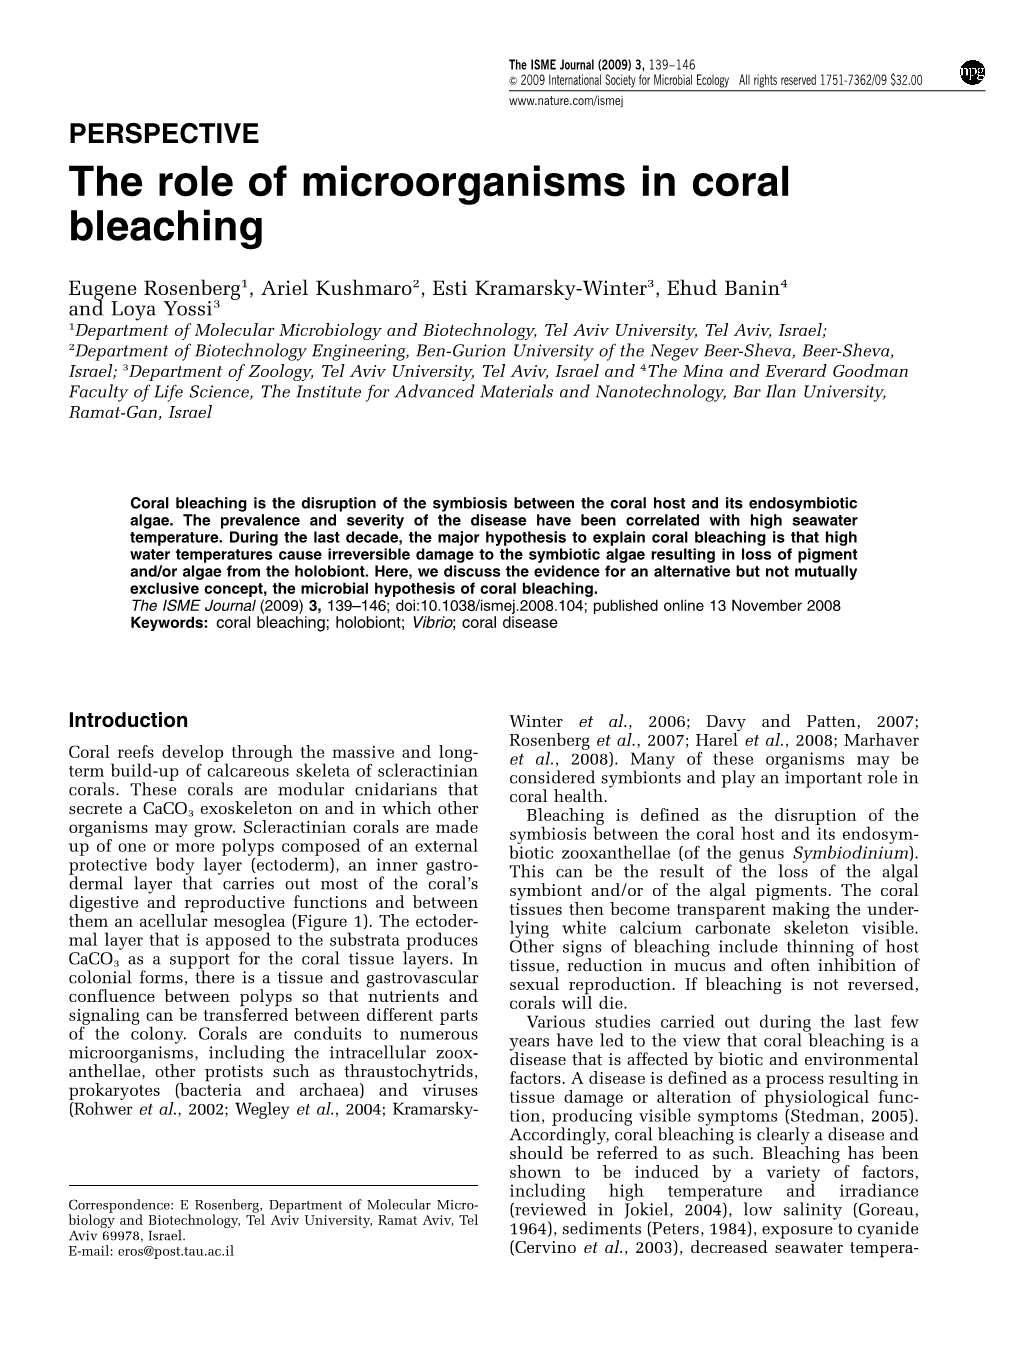 The Role of Microorganisms in Coral Bleaching